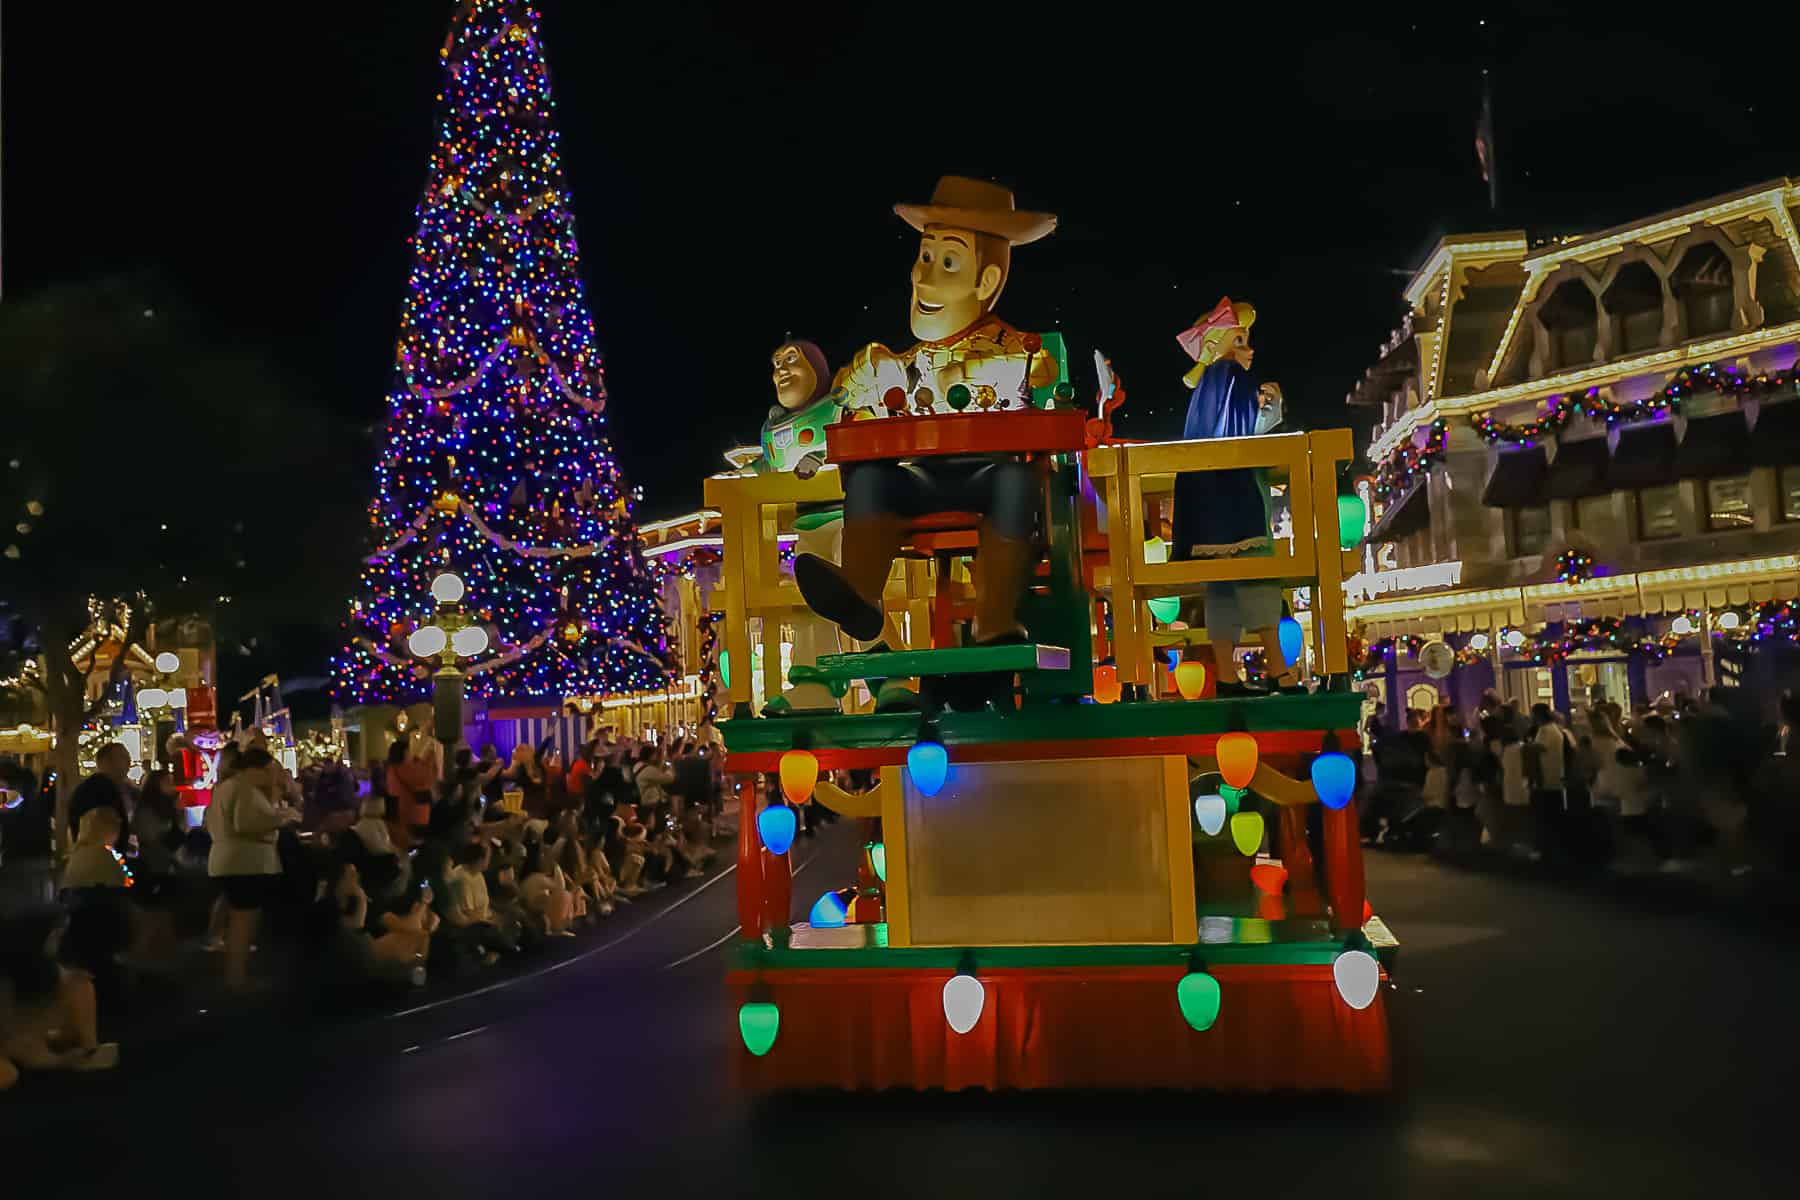 The Toy Story Float glows at nighttime. 